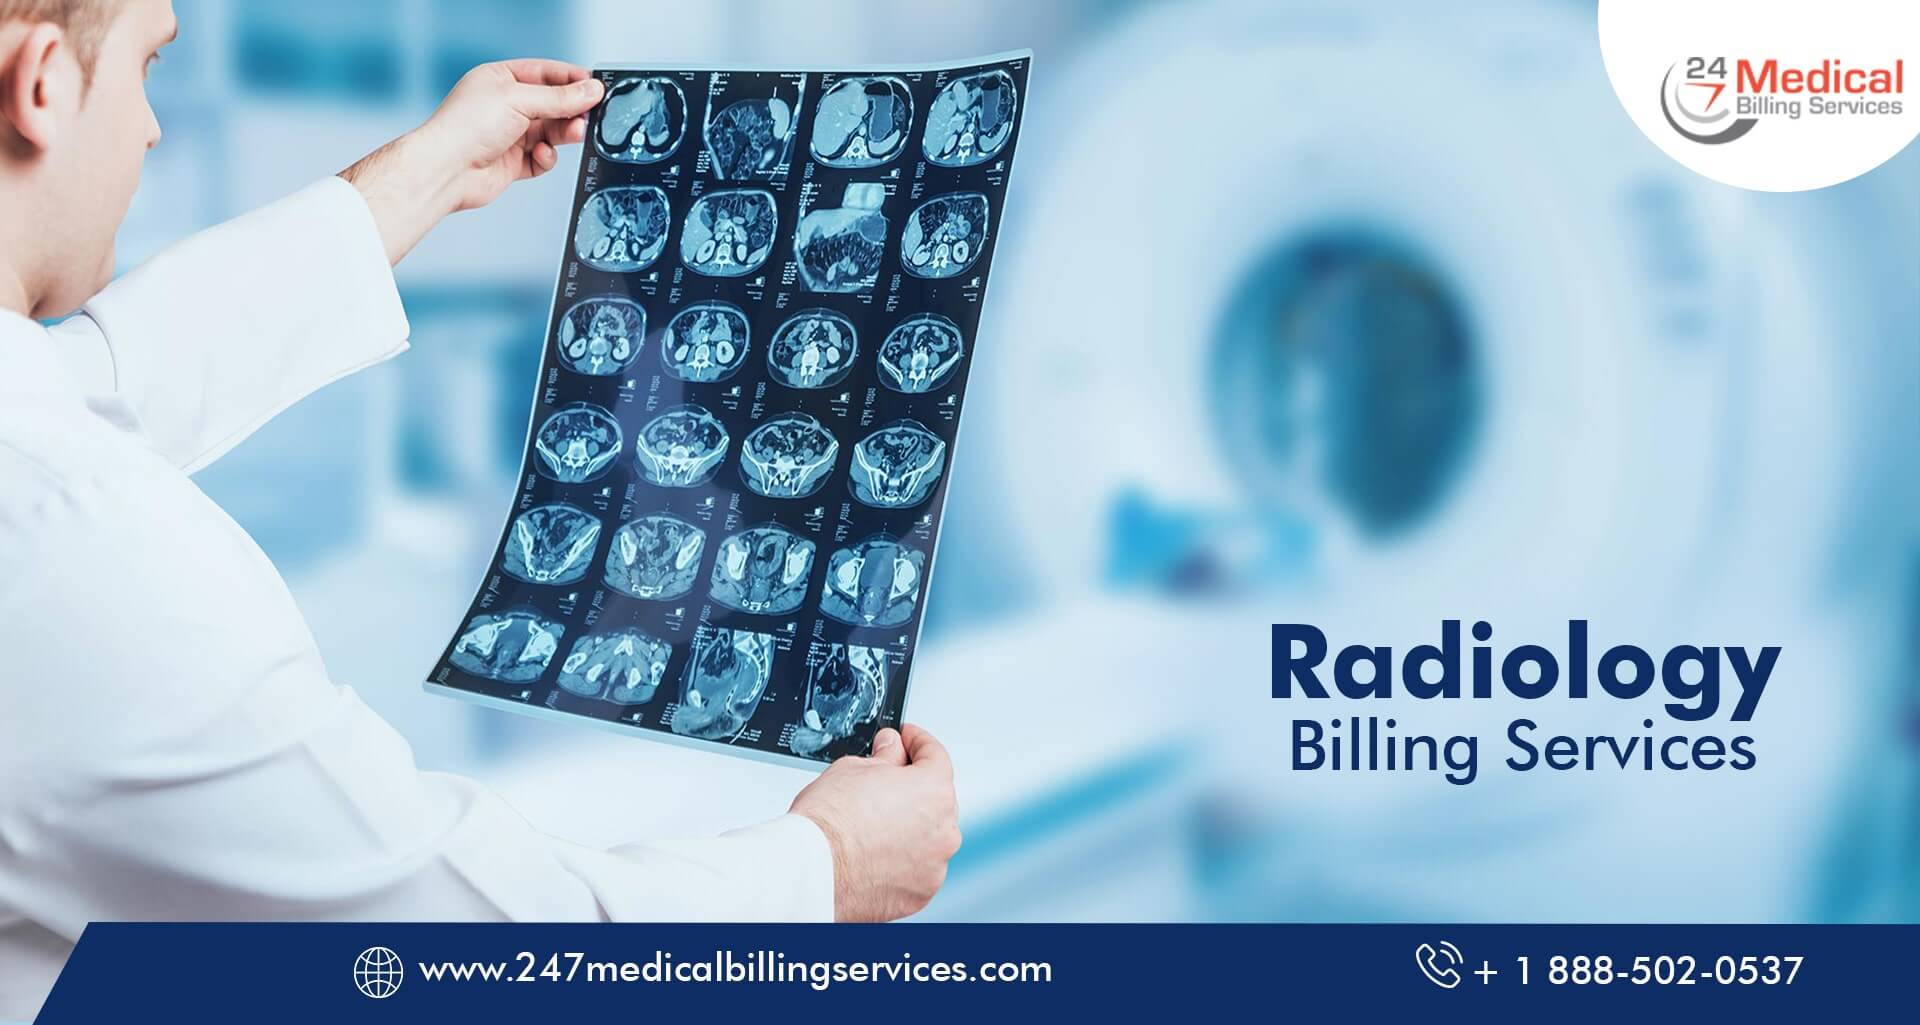  Radiology Billing Services in Garland, Texas (TX)